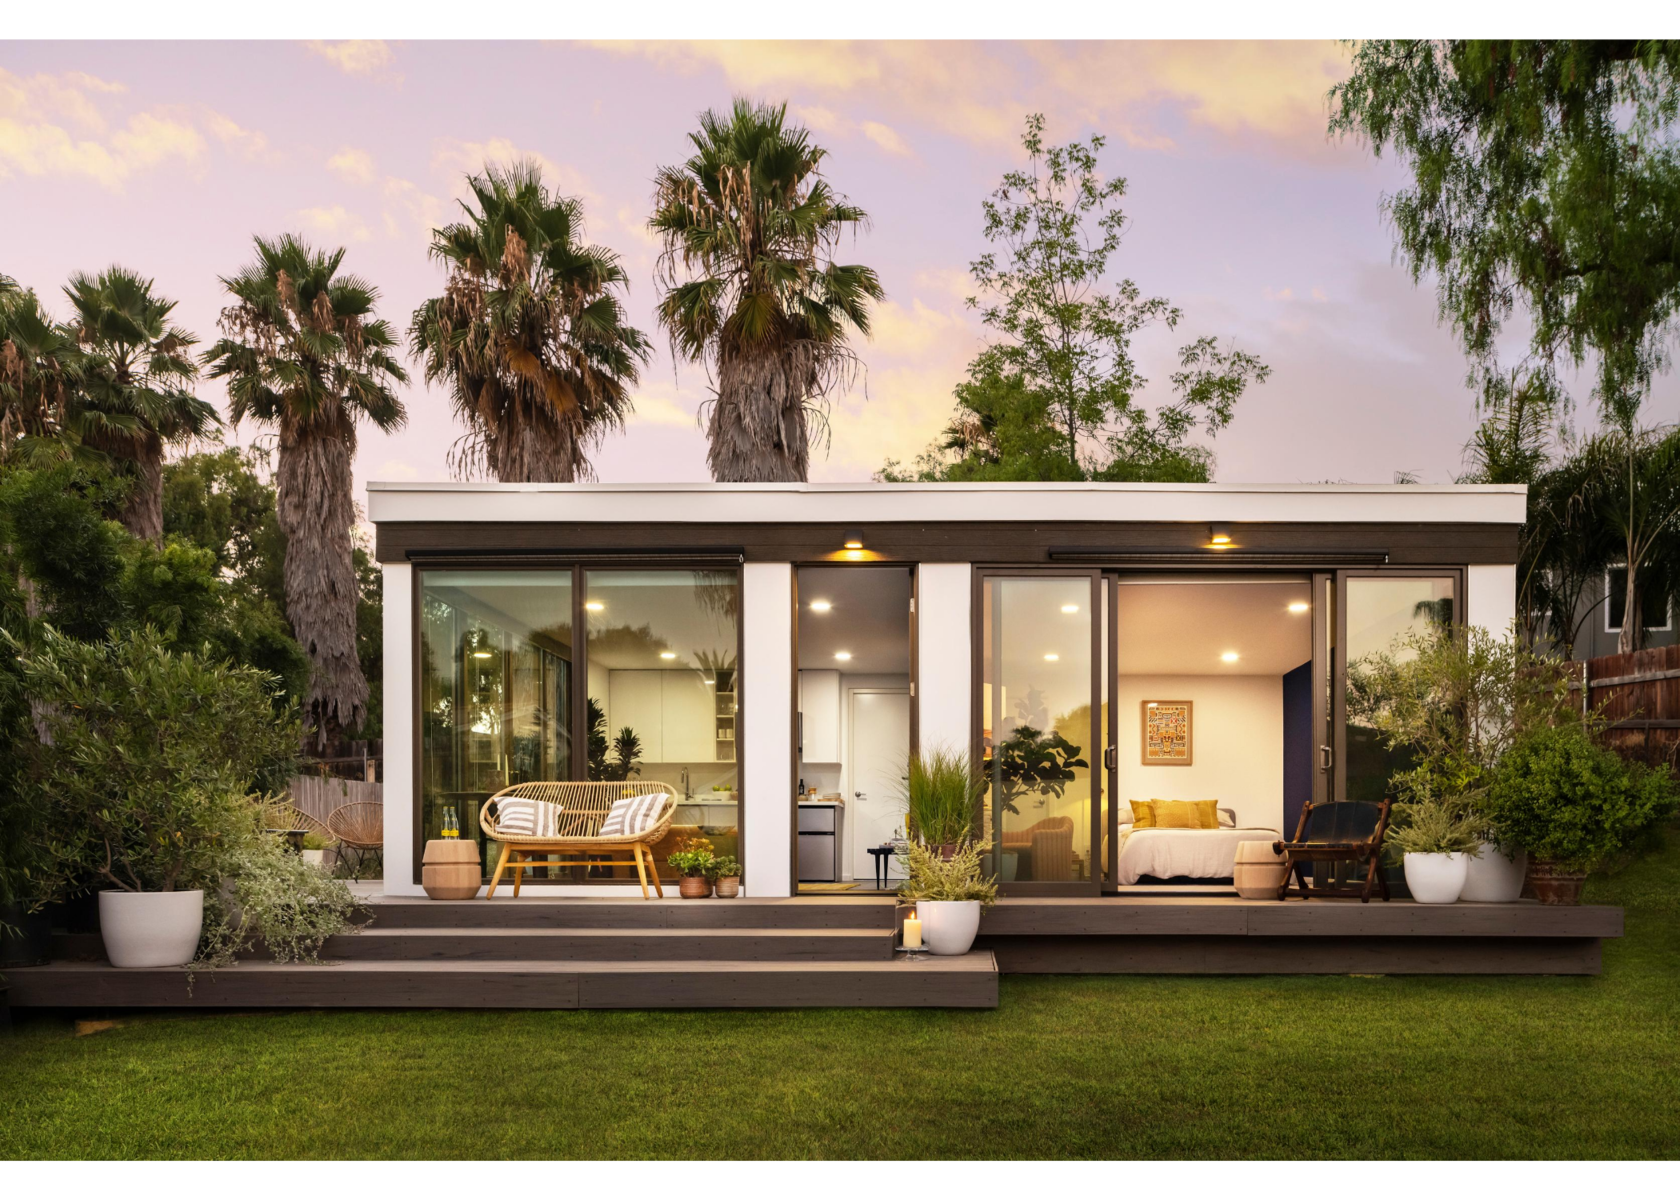 Mighty Buildings’ 700 square feet project in San Diego. (Image courtesy of Mighty Buildings.)